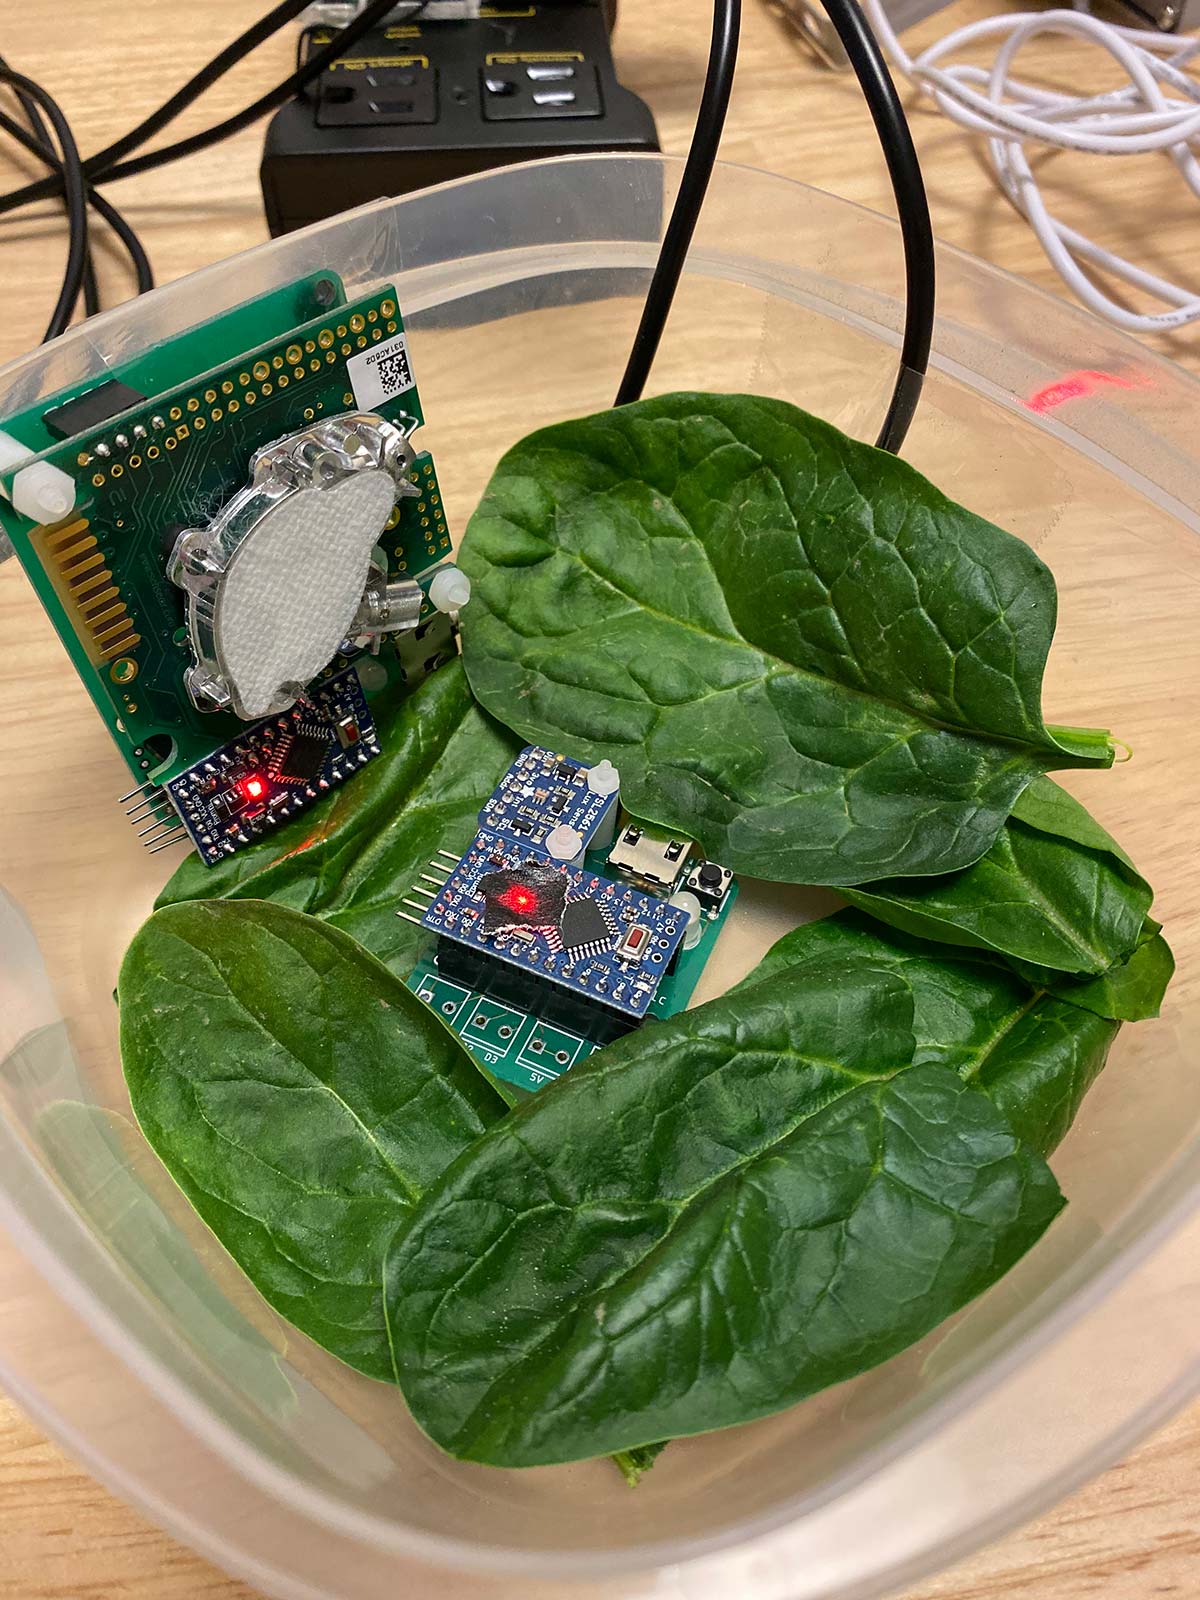 A mini-biosphere in preparation, containing spinach, a carbon dioxide sensor, and light sensor. 